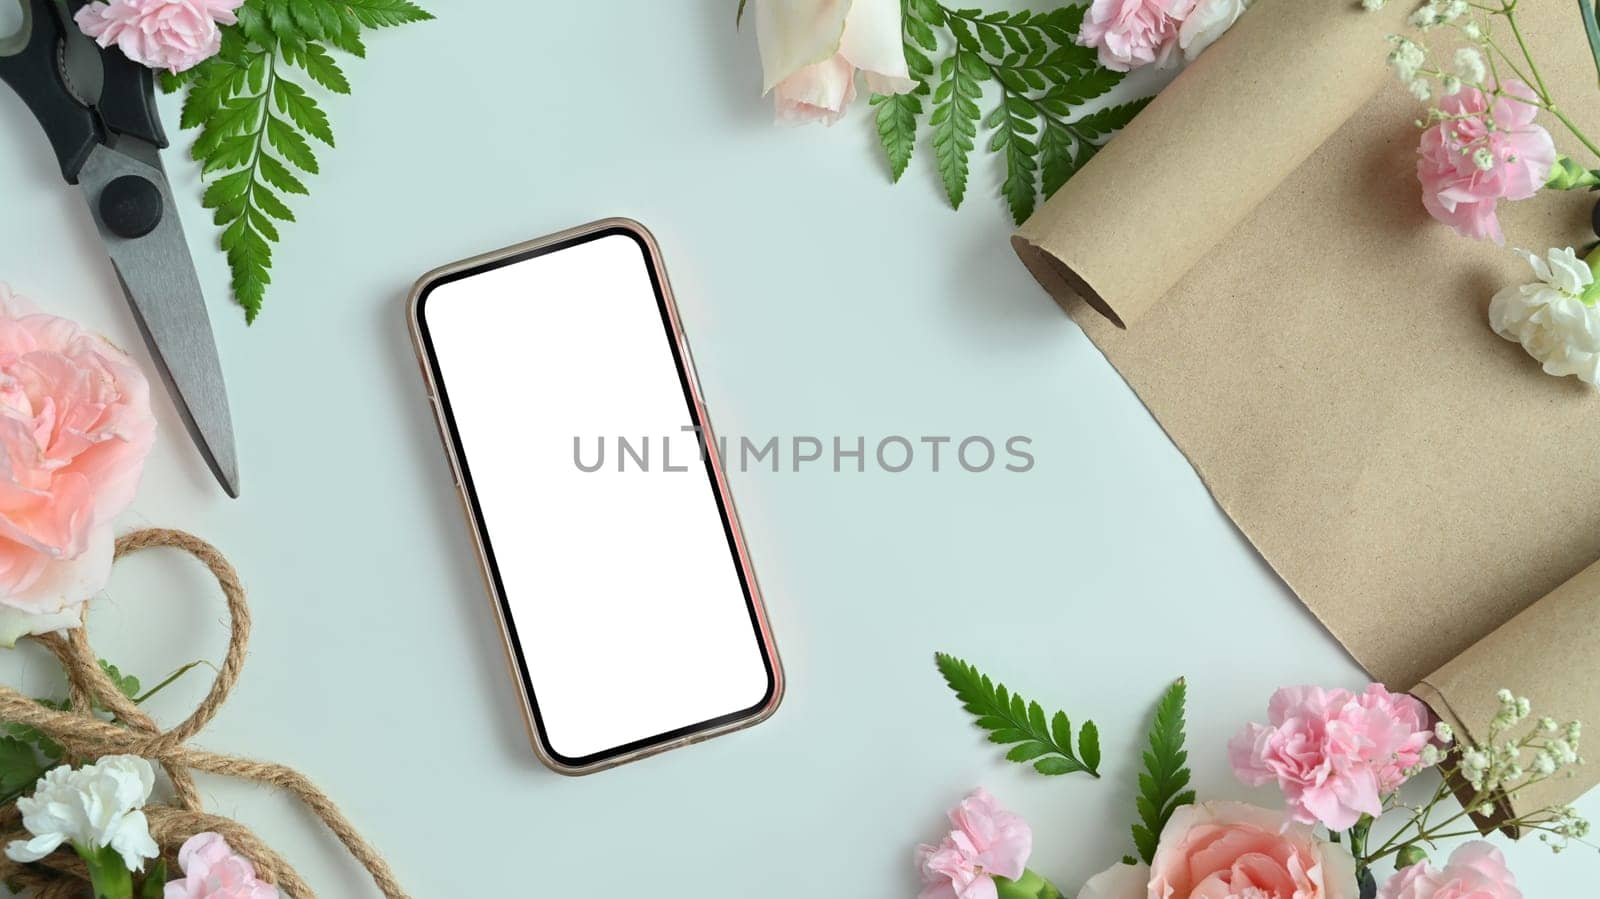 Smartphone with blank screen, pink flowers, shears, wrapping paper and leaves arrangement on white background.